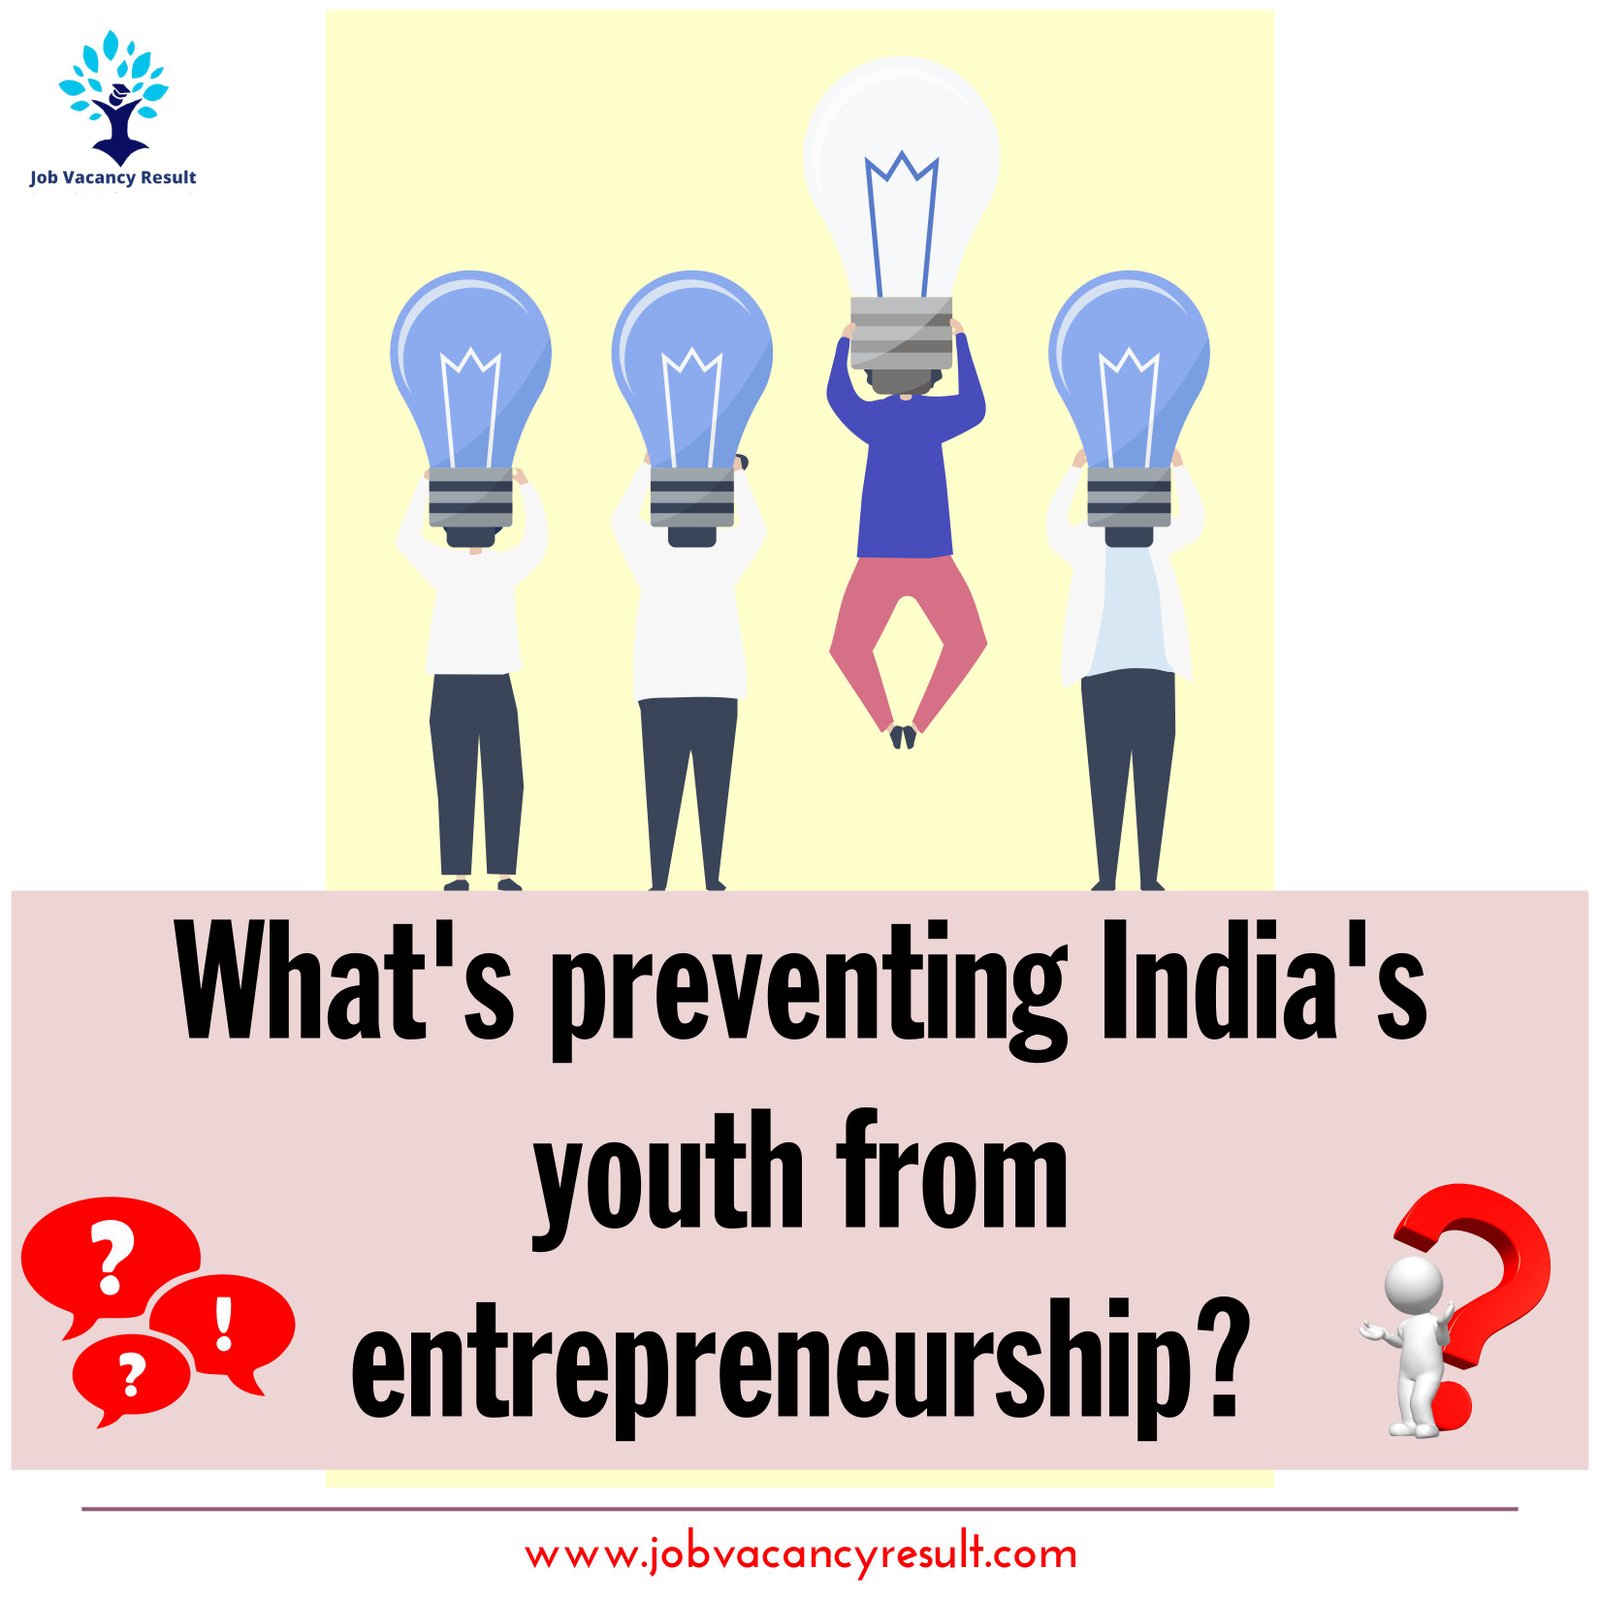 What's preventing India's youth from entrepreneurship?